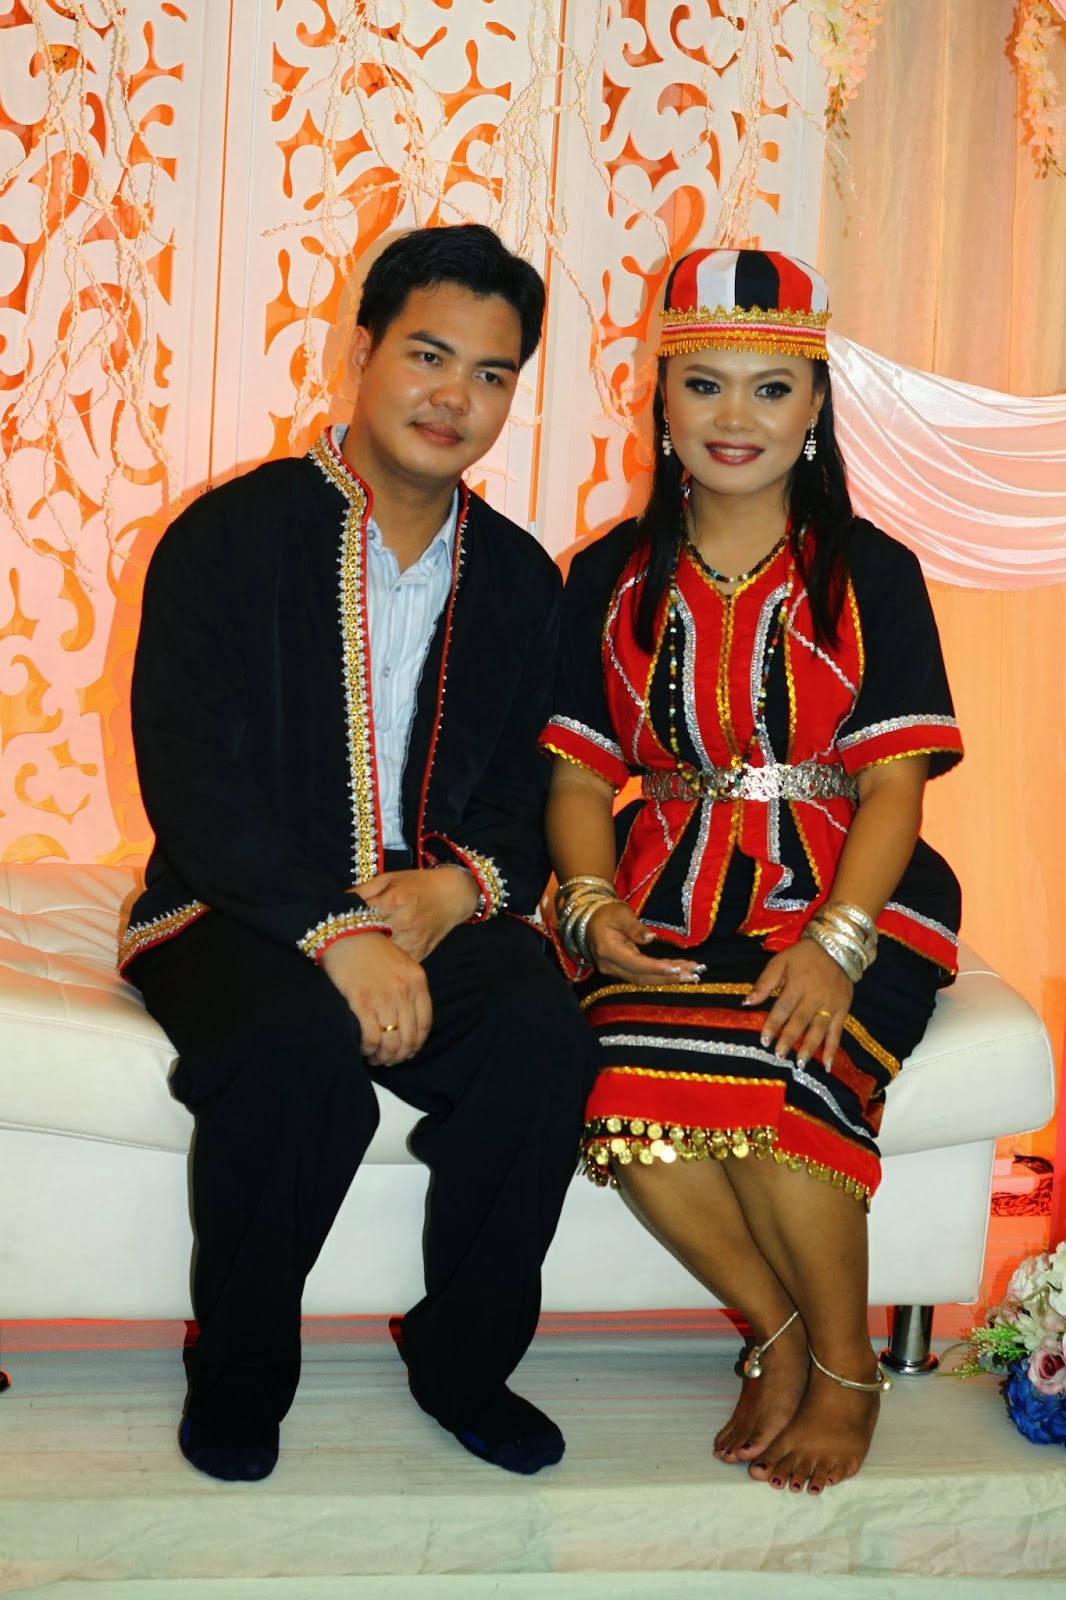 image of a traditional Iban wedding ceremony